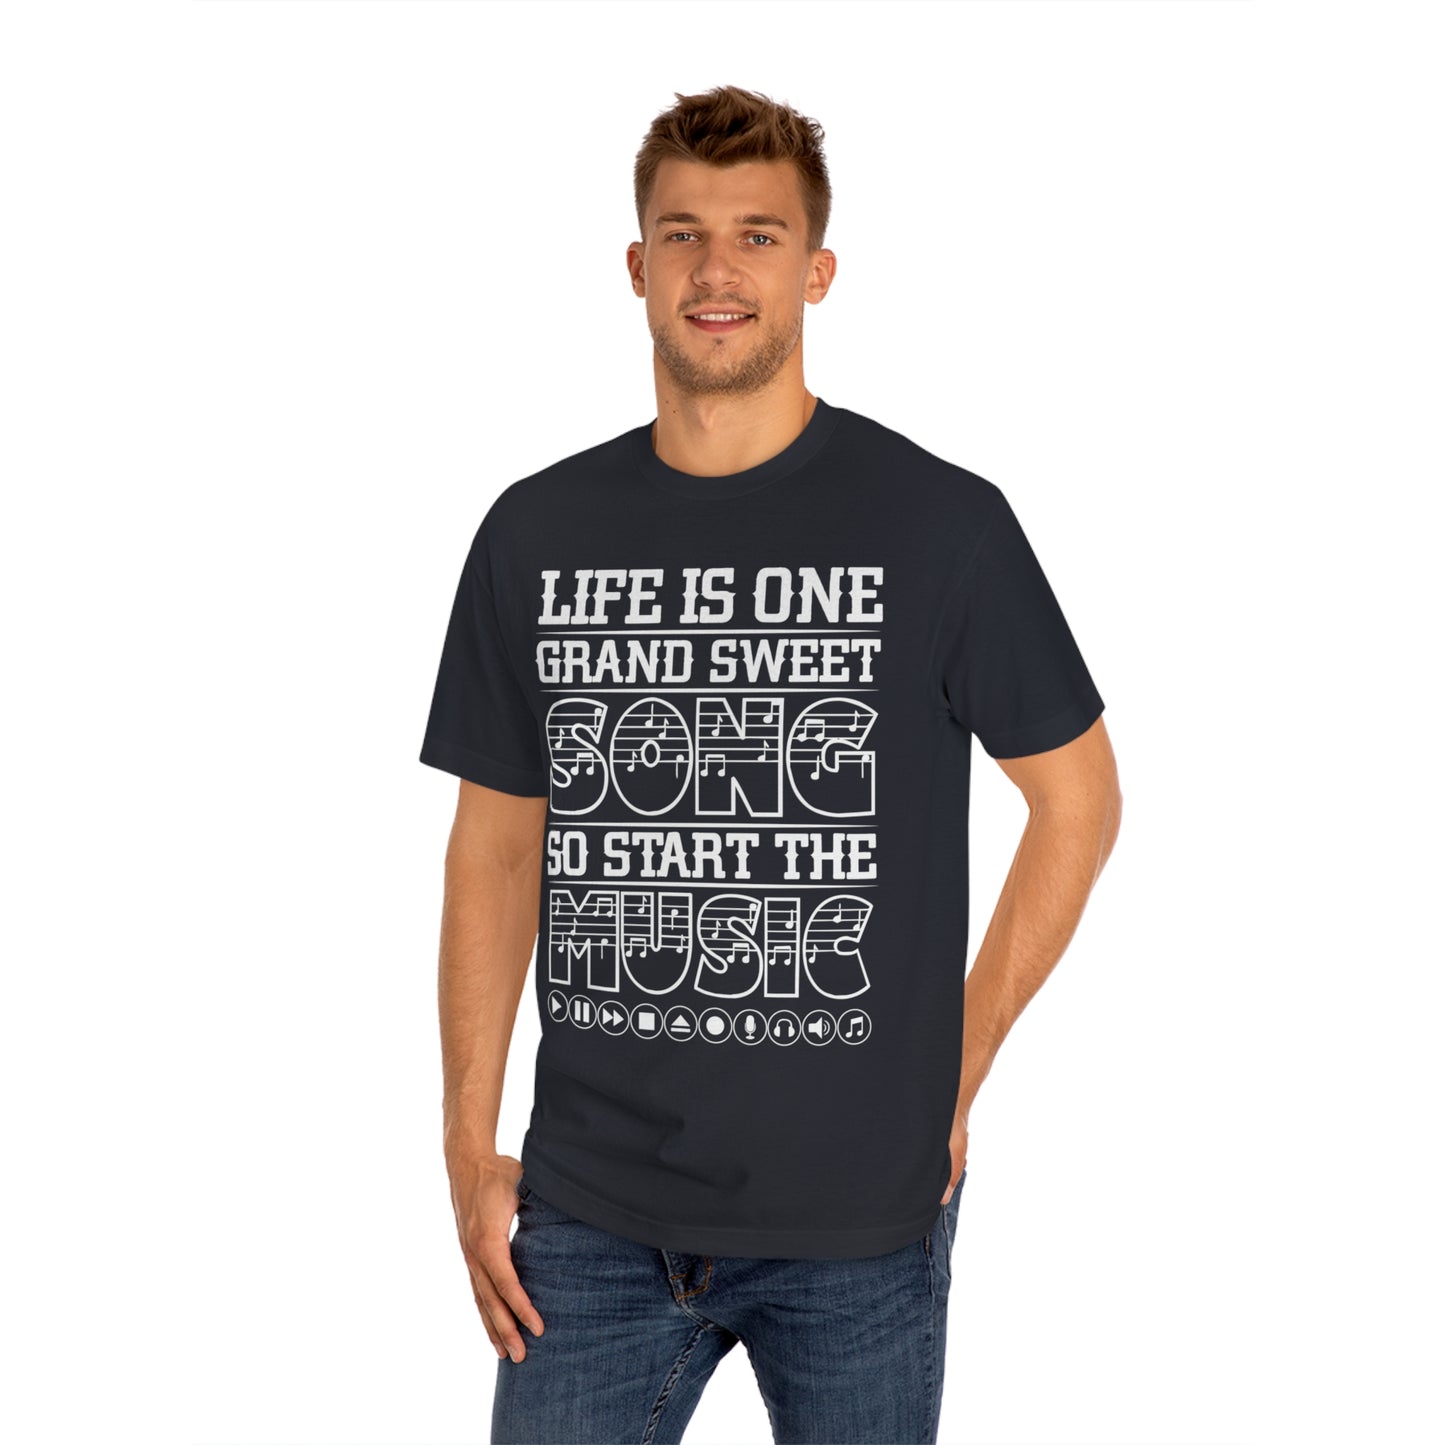 Life is one grand sweet song so start the music Unisex Classic Tee